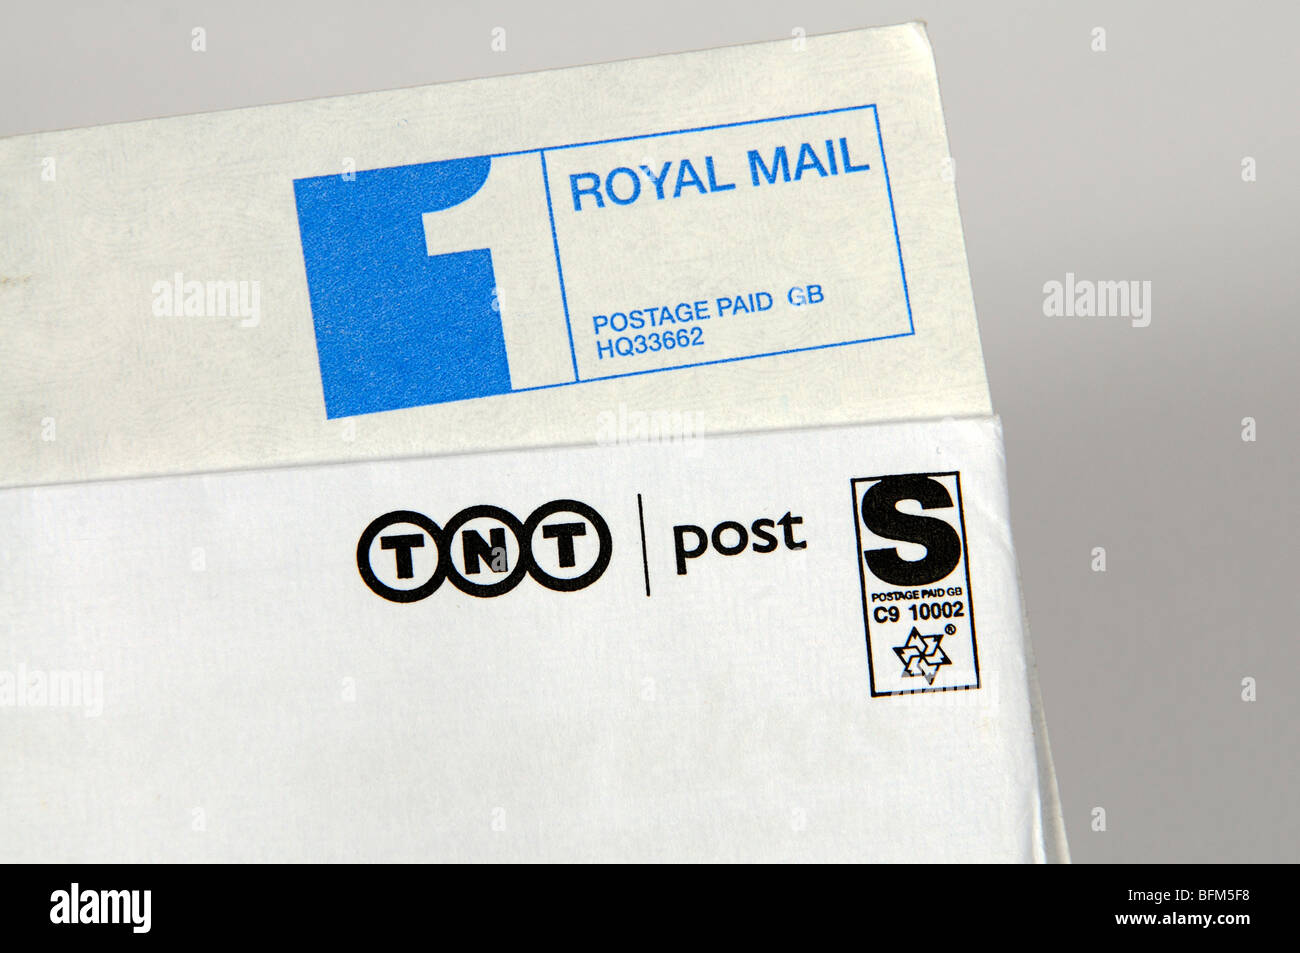 1st class postage paid Royal Mail label & competitor TNT Post label Stock Photo